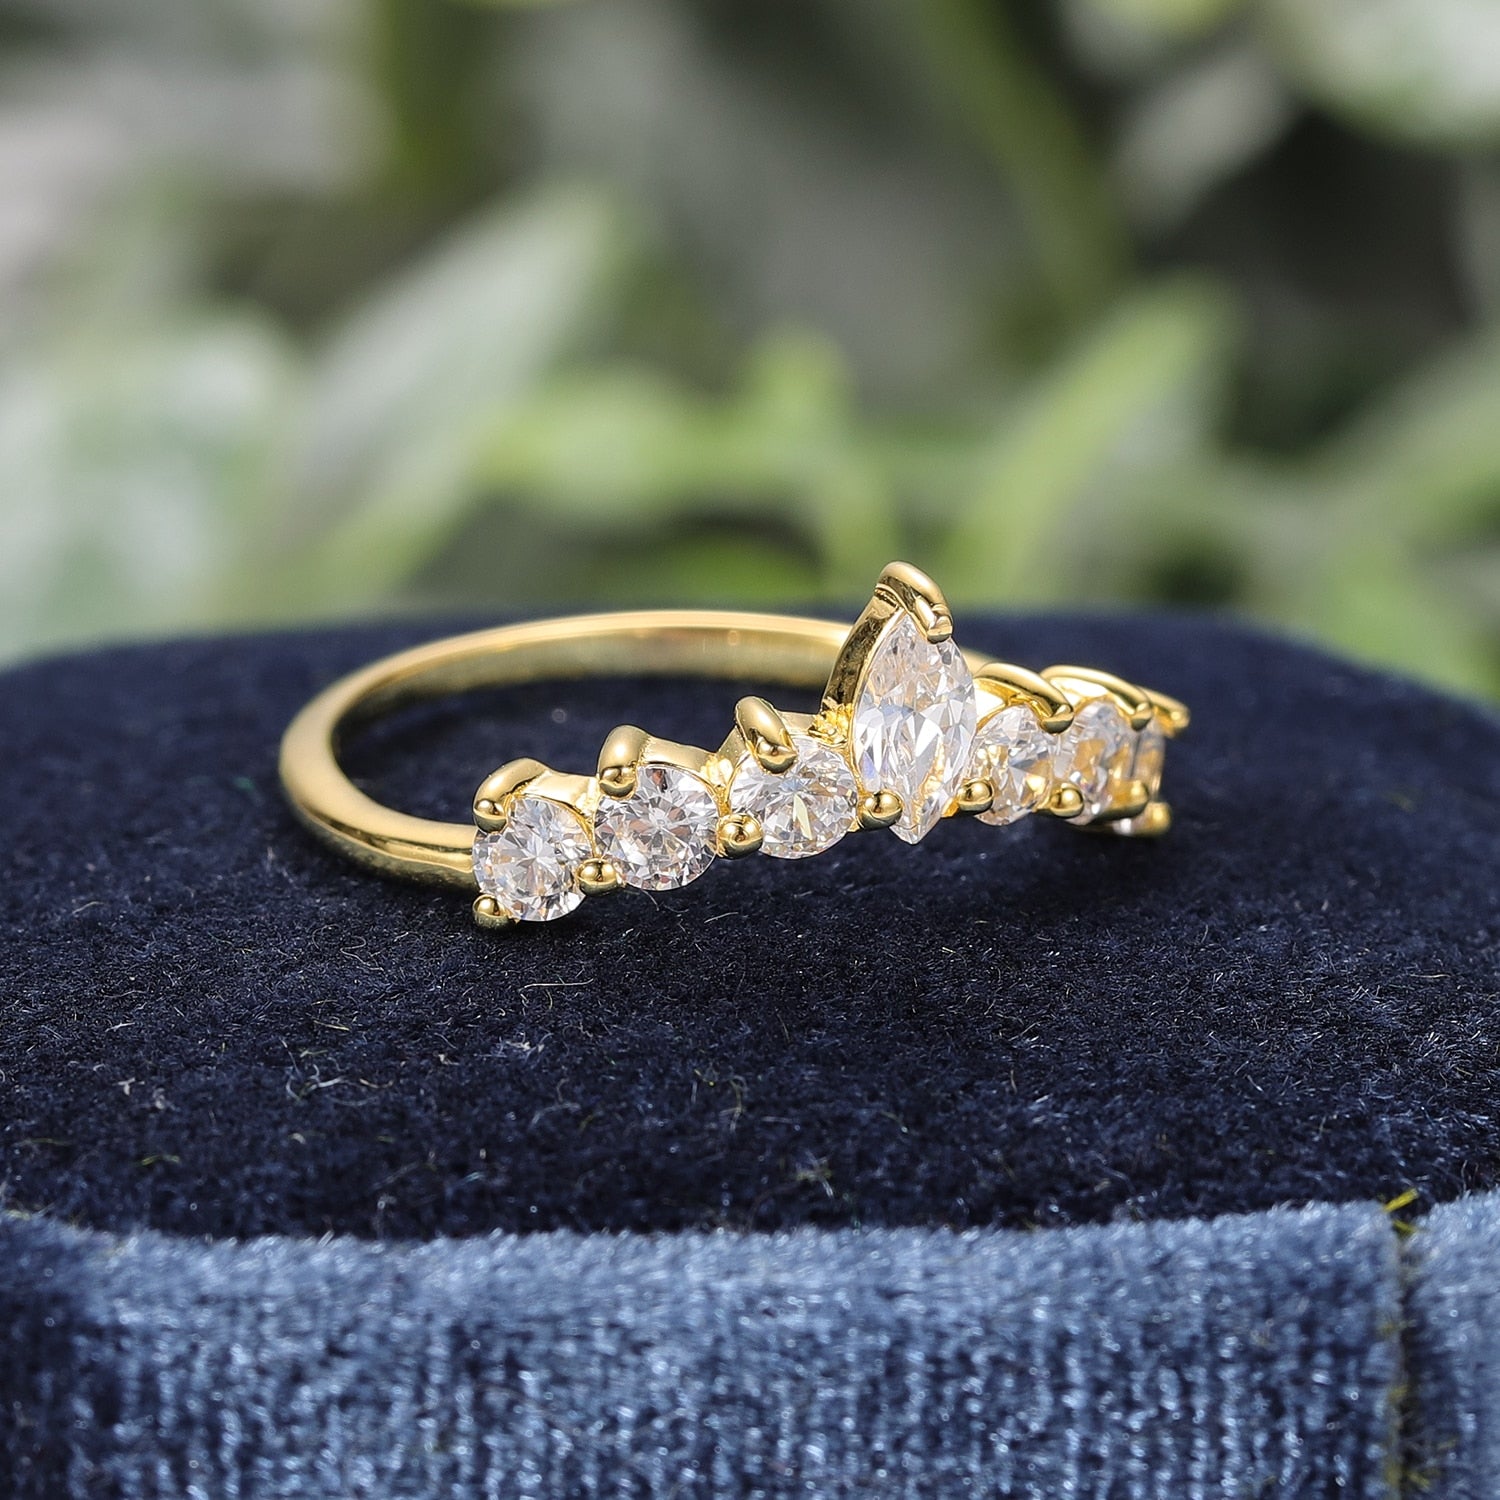 A gold slightly curved wedding ring with small round moissanites and a marquise moissanite in the center.